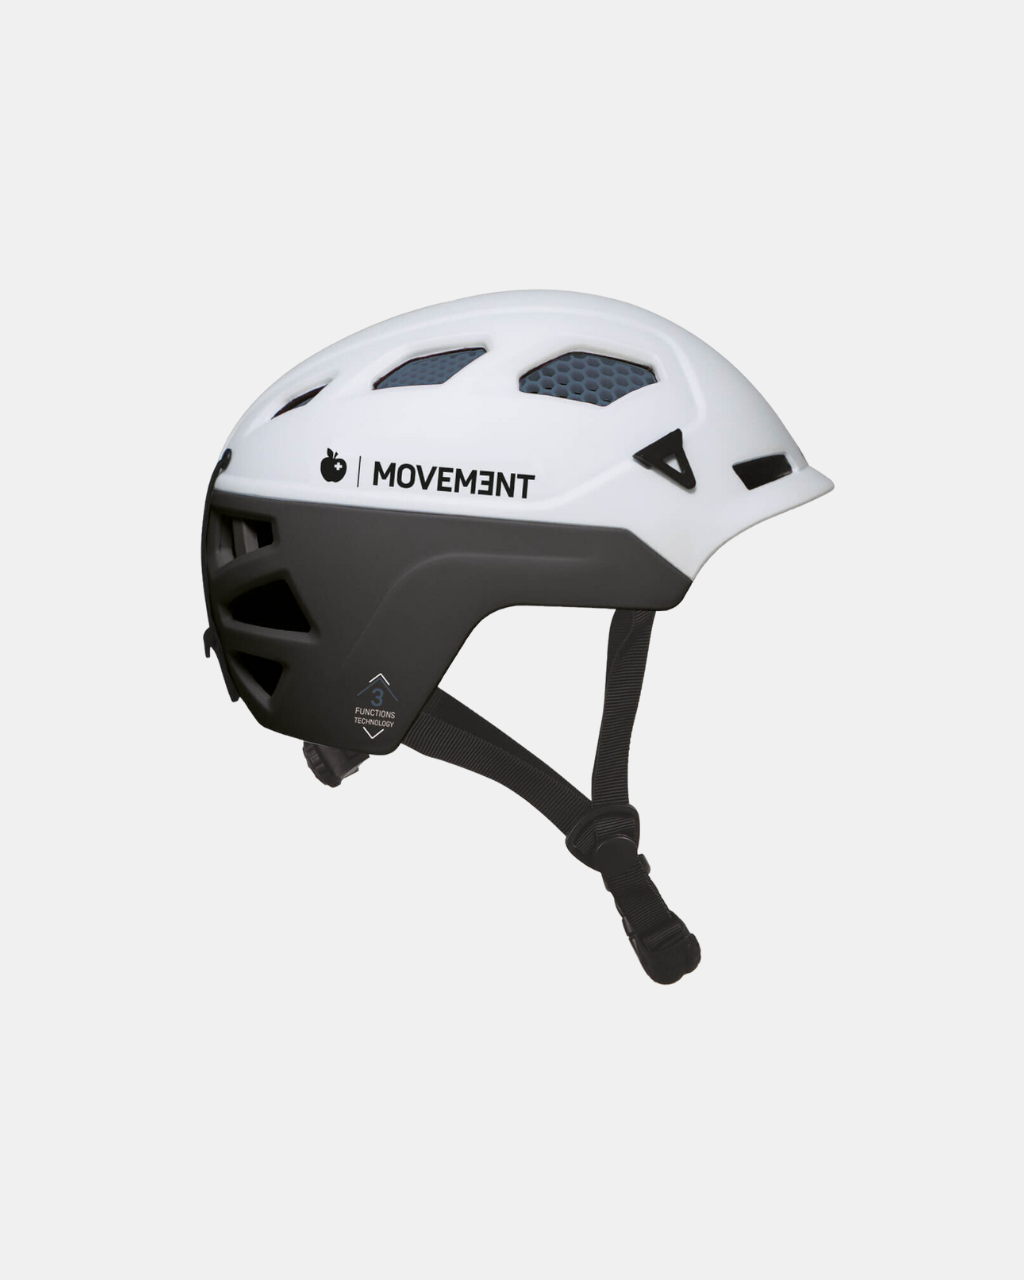 The Movement 3Tech Alpi blue helmet showcasing its streamlined design and advanced safety features.